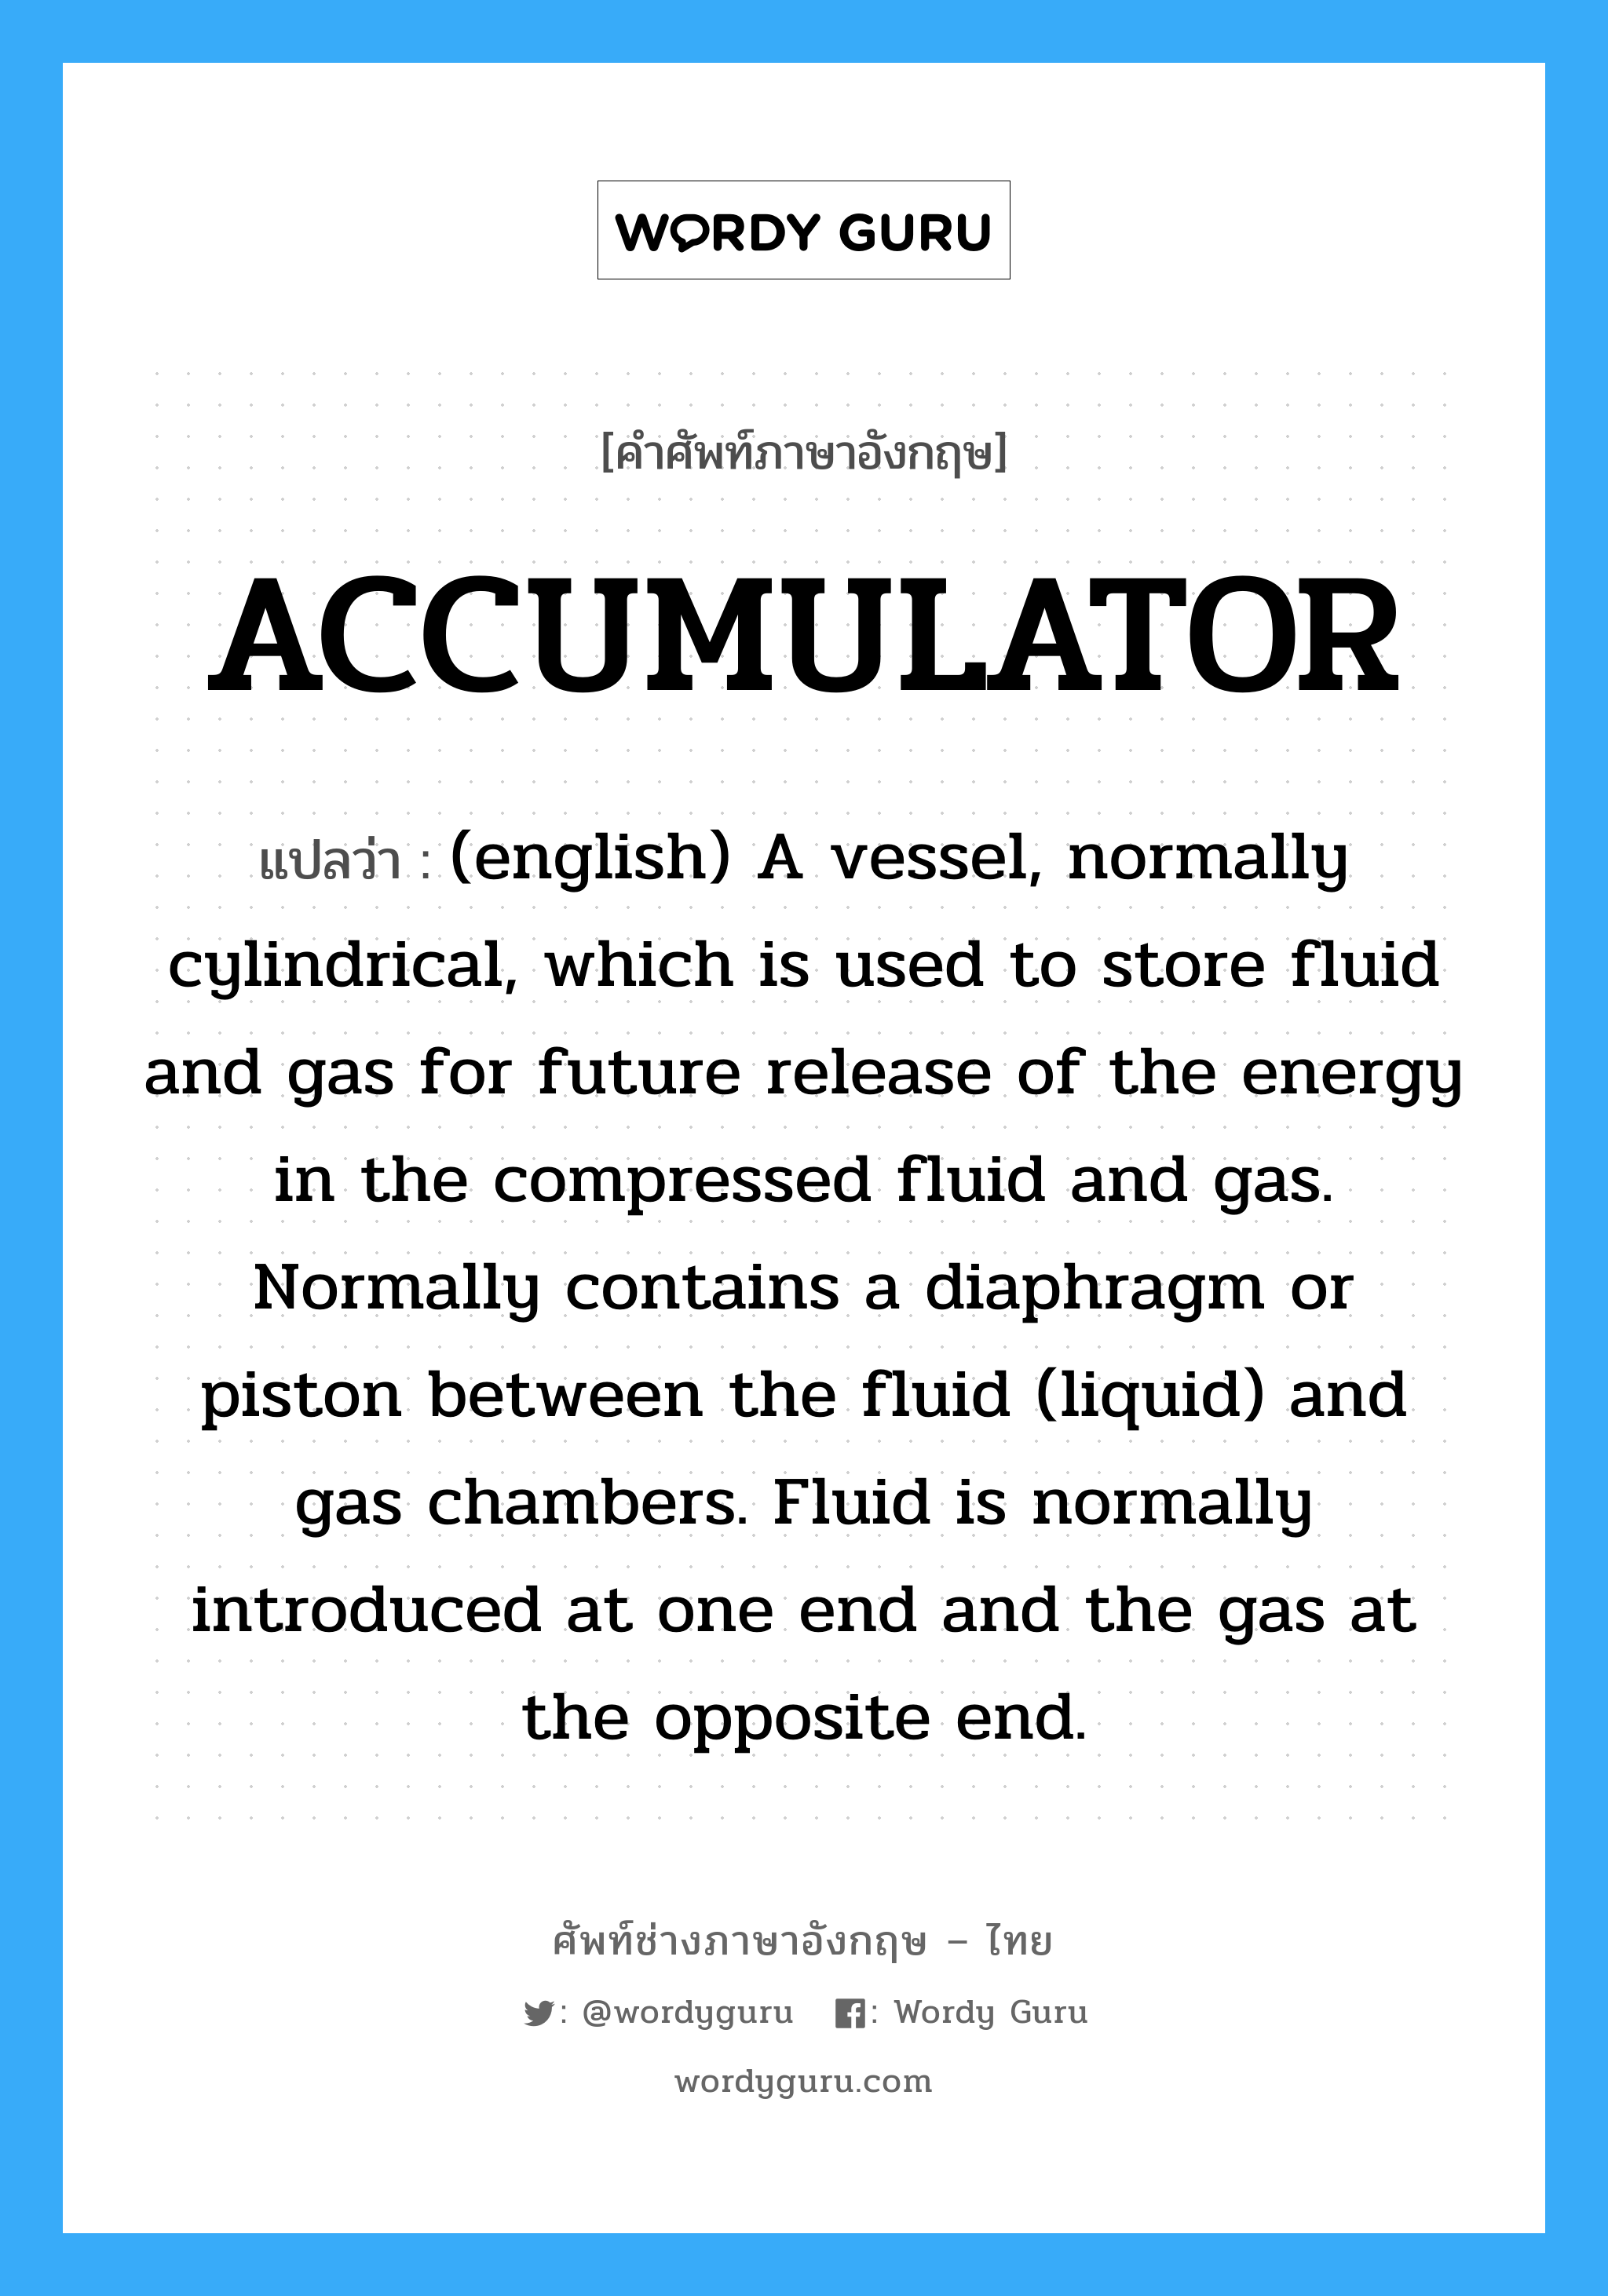 (english) A vessel, normally cylindrical, which is used to store fluid and gas for future release of the energy in the compressed fluid and gas. Normally contains a diaphragm or piston between the fluid (liquid) and gas chambers. Fluid is normally introduced at one end and the gas at the opposite end. ภาษาอังกฤษ?, คำศัพท์ช่างภาษาอังกฤษ - ไทย (english) A vessel, normally cylindrical, which is used to store fluid and gas for future release of the energy in the compressed fluid and gas. Normally contains a diaphragm or piston between the fluid (liquid) and gas chambers. Fluid is normally introduced at one end and the gas at the opposite end. คำศัพท์ภาษาอังกฤษ (english) A vessel, normally cylindrical, which is used to store fluid and gas for future release of the energy in the compressed fluid and gas. Normally contains a diaphragm or piston between the fluid (liquid) and gas chambers. Fluid is normally introduced at one end and the gas at the opposite end. แปลว่า ACCUMULATOR